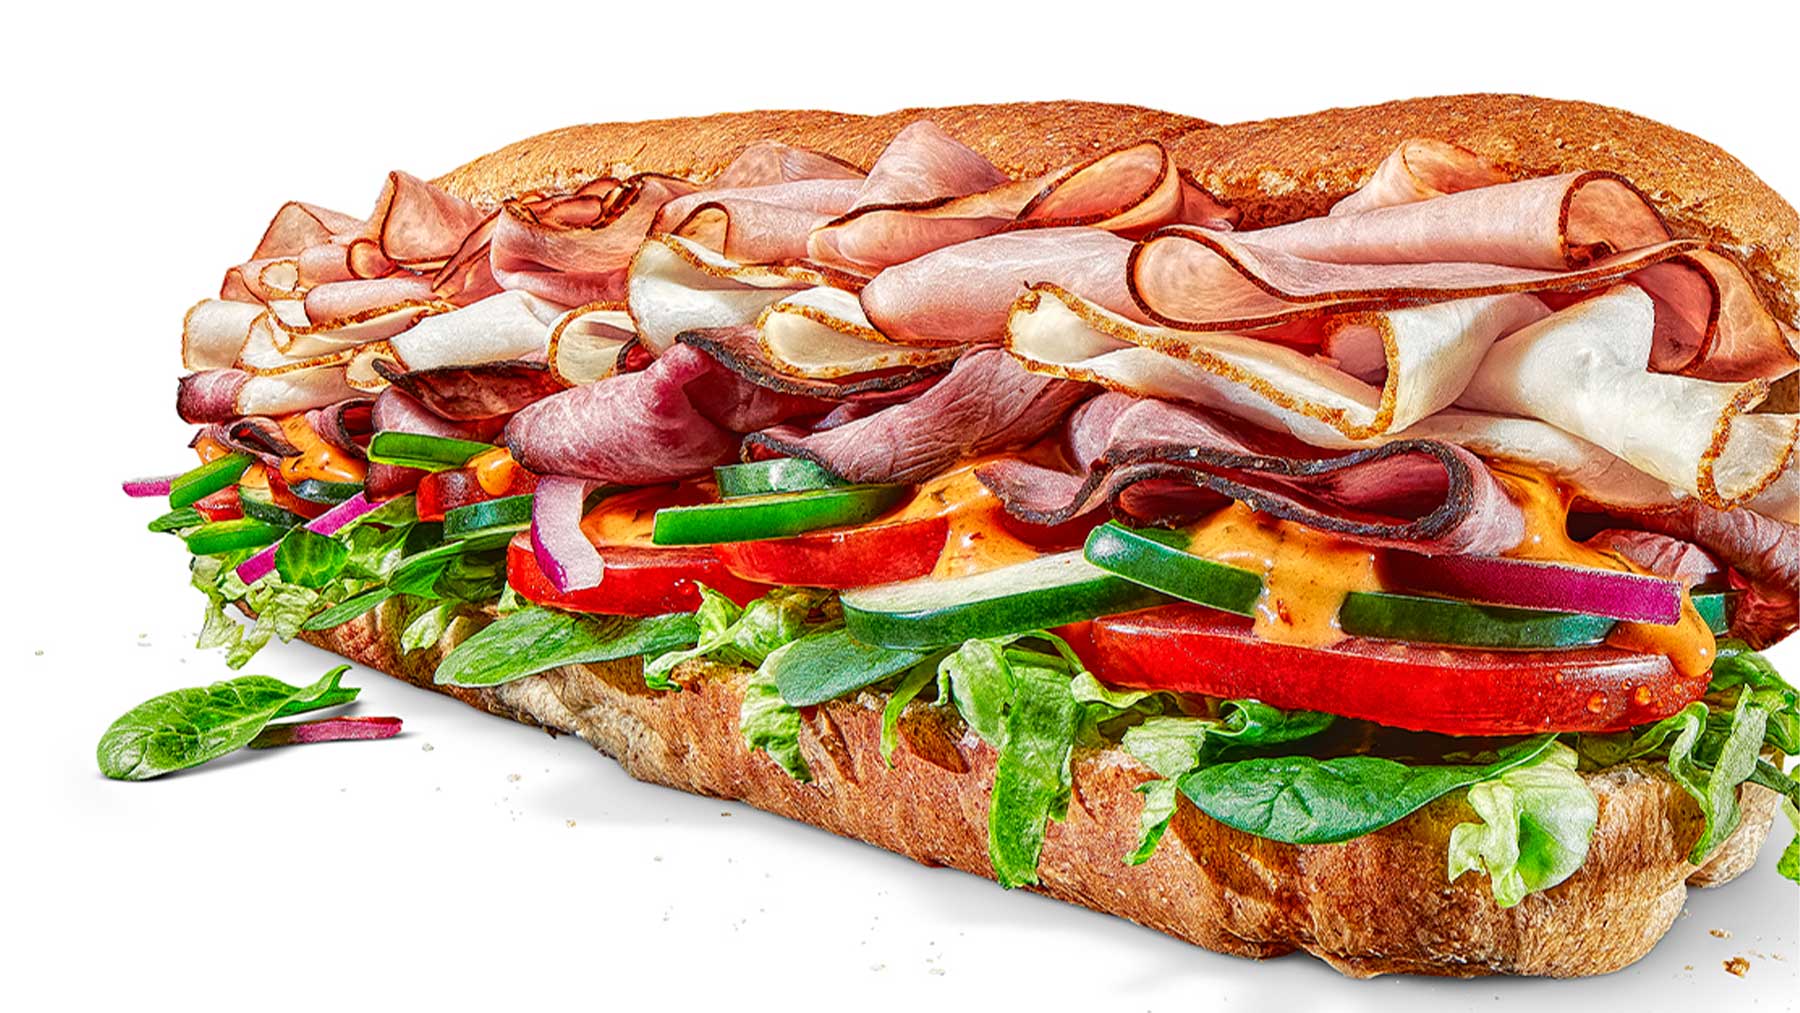 Here's How to Score a Free Subway Sandwich This Summer—Plus All